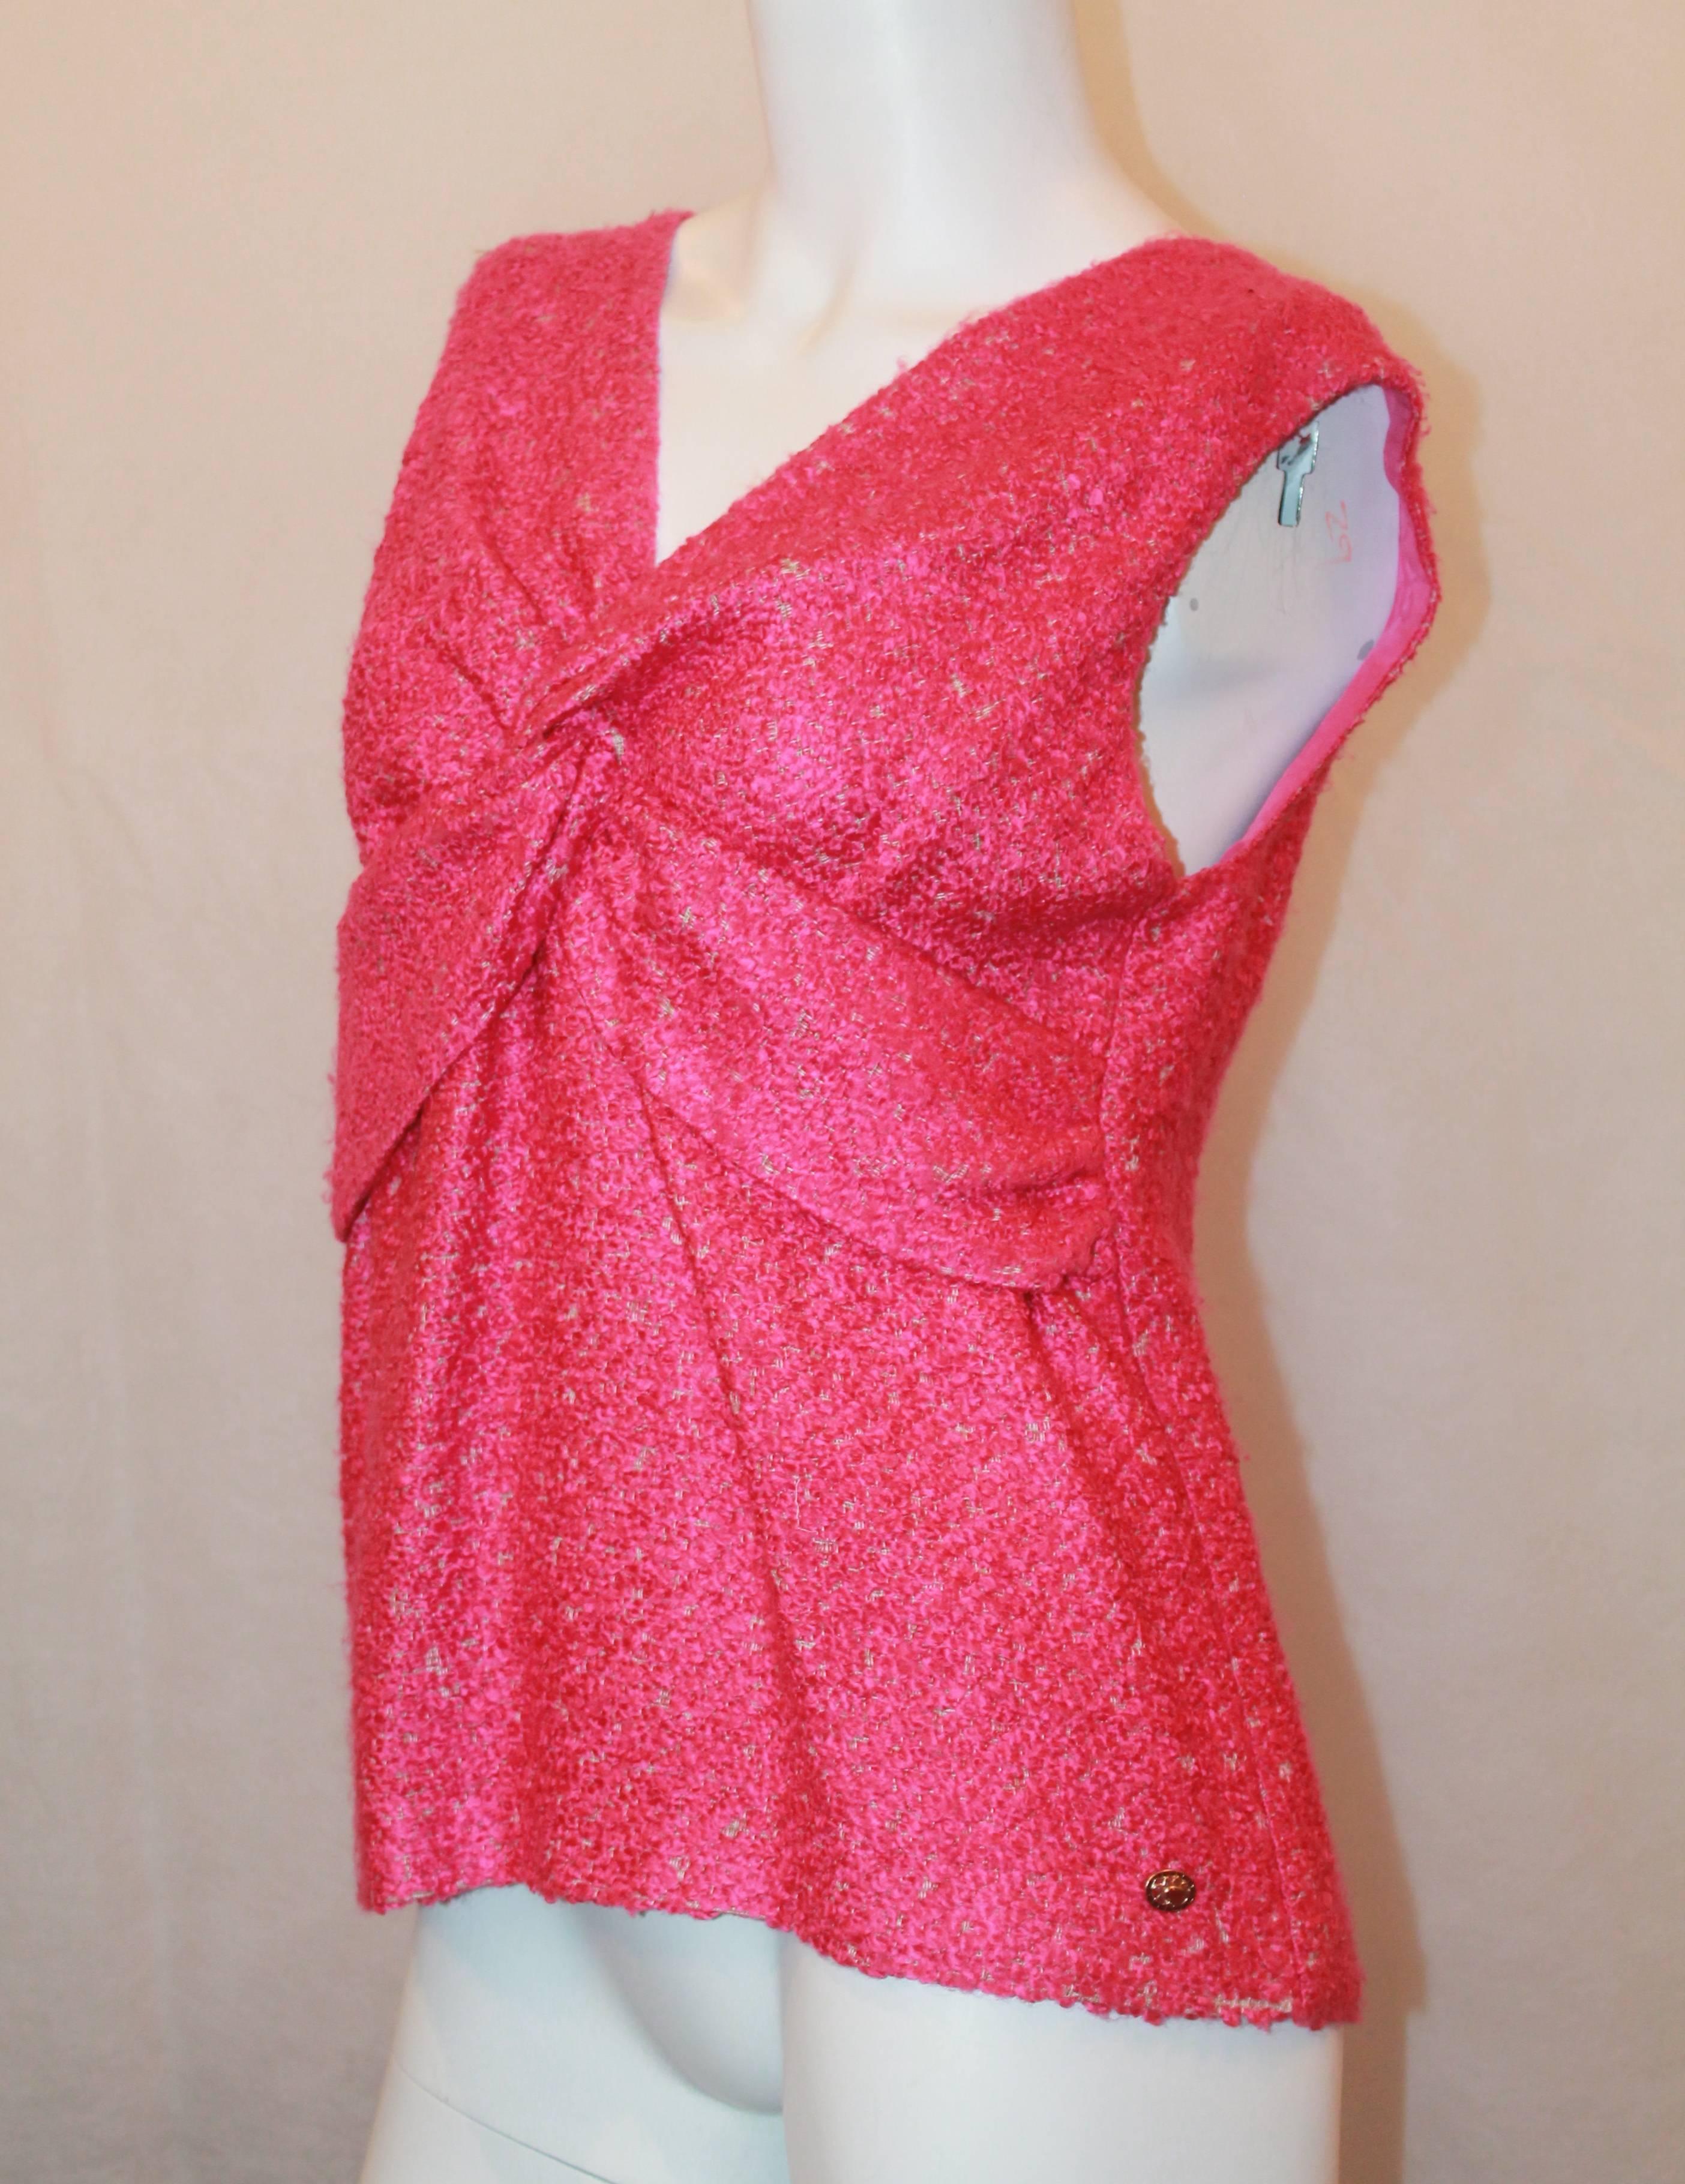 Chanel Fuchsia Tweed Top w/ Gripoix Detail & Knotted Ruched Front - NWT - 40.  This beautifully colorful Chanel top is in excellent condition.  It features gripoix detail, a knotted ruched front, a back zipper, and a soft acrylic tweed fabric.  It